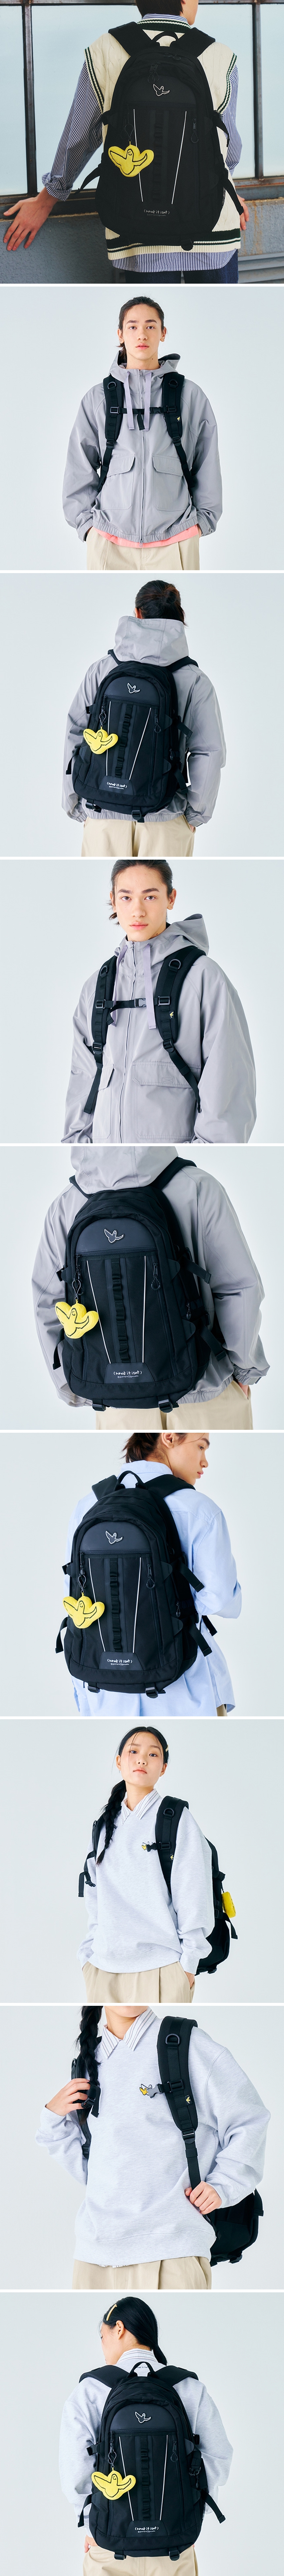 23SS_backpack_intro_1-vert